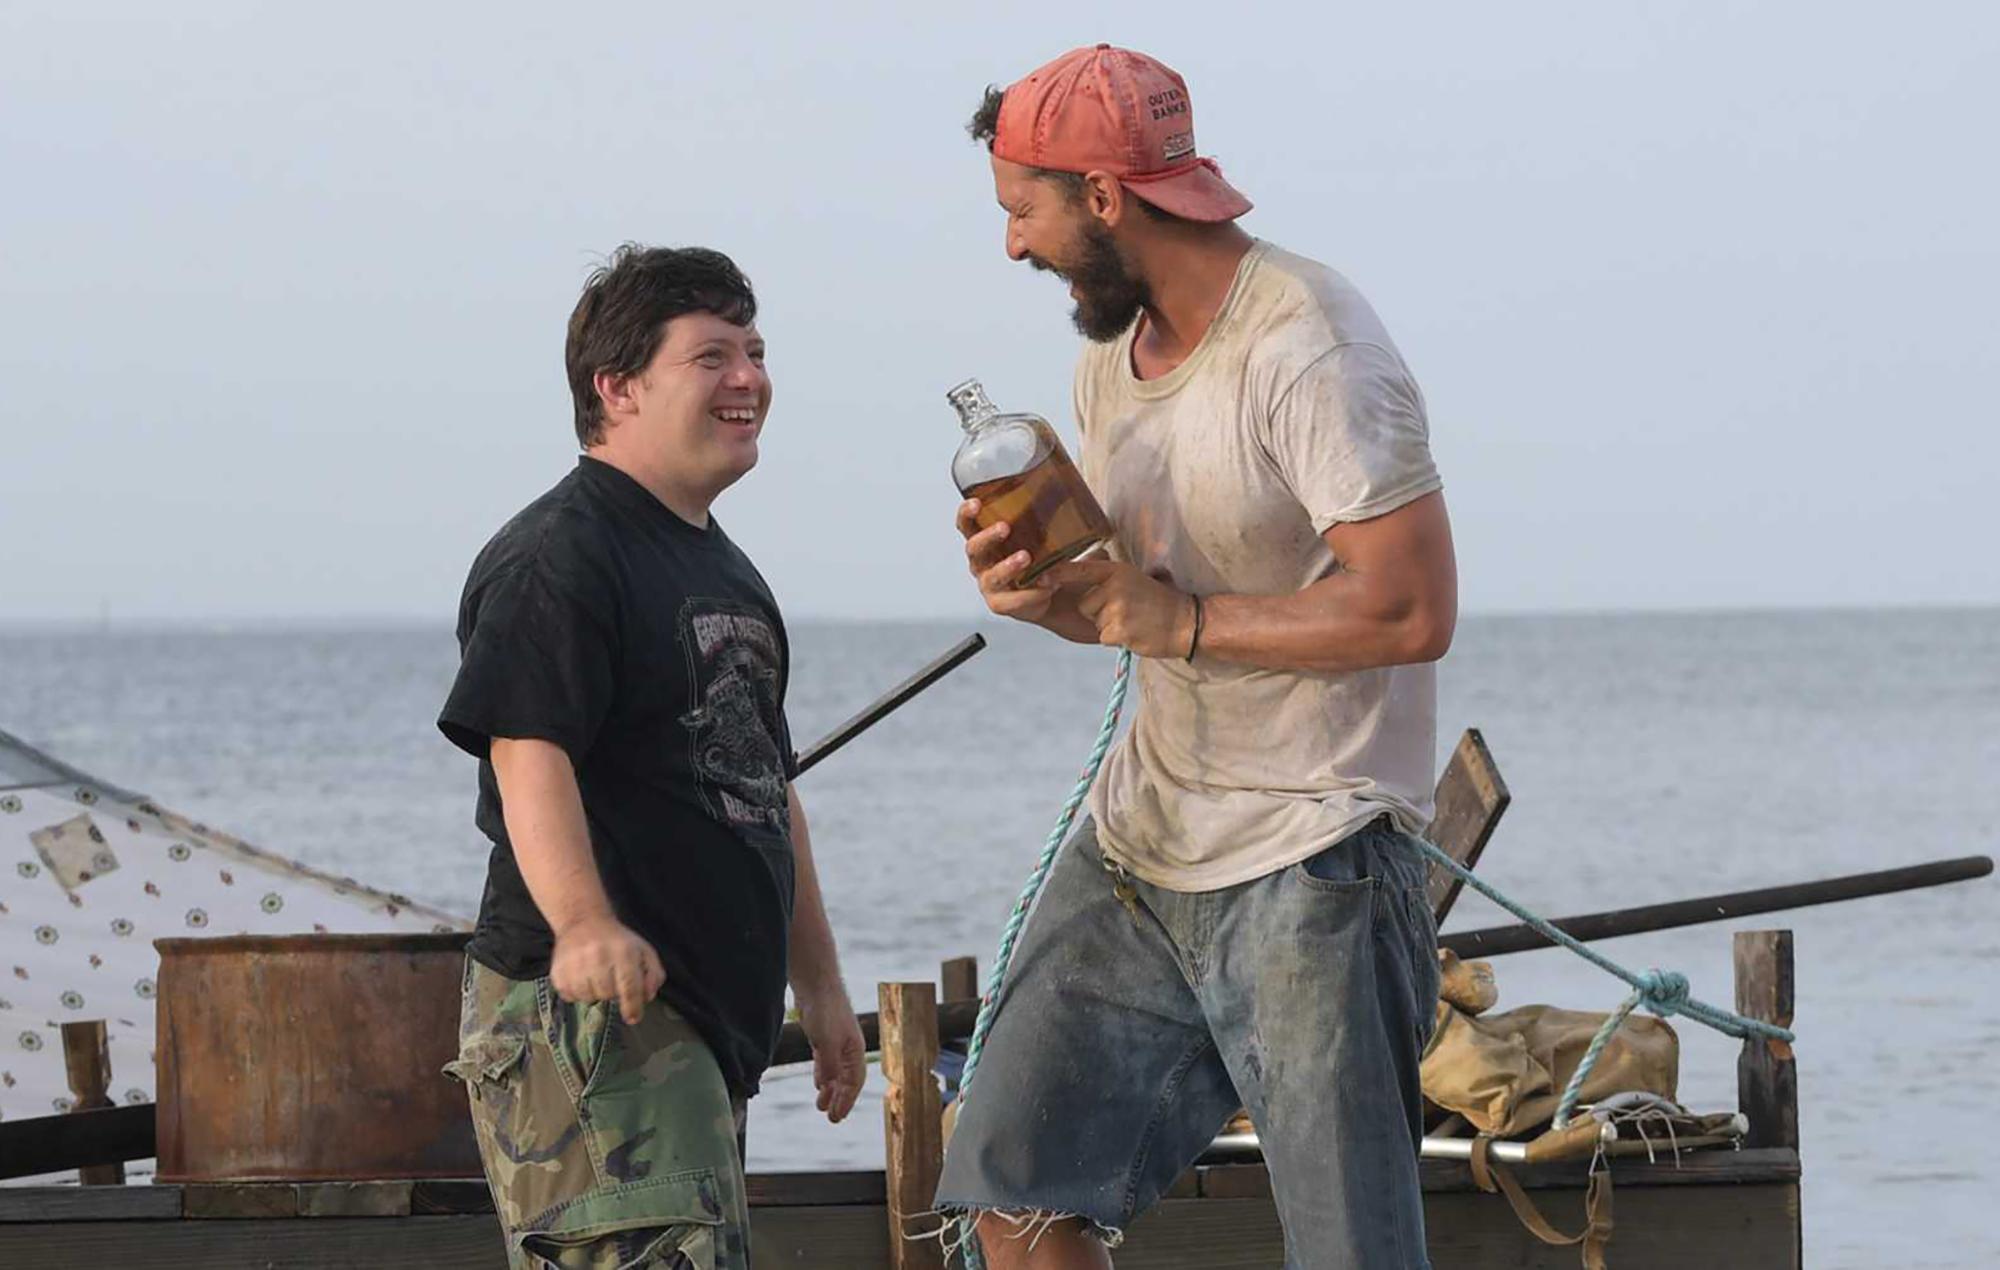 'The Peanut Butter Falcon' review: Shia LaBeouf shines in a wholesome indie about unlikely friendship